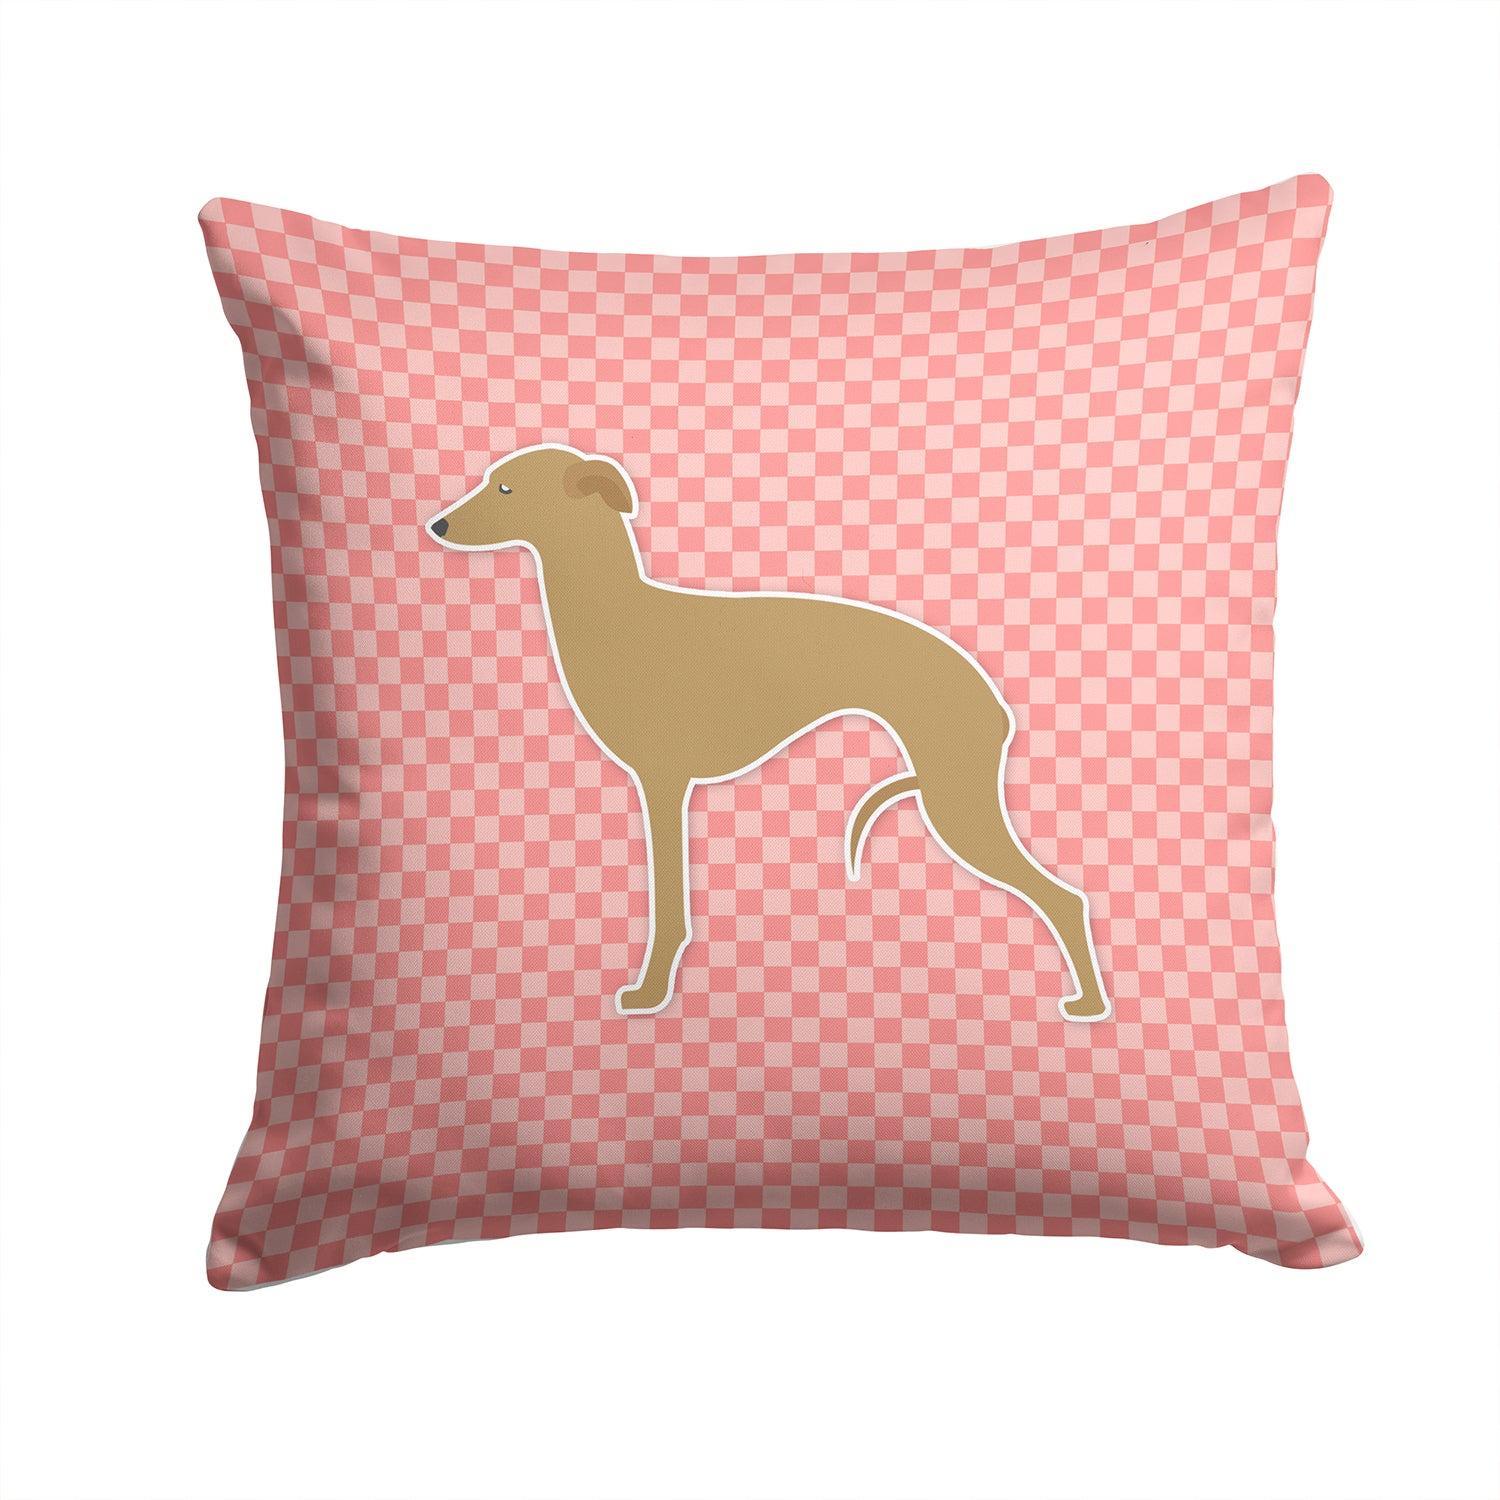 Italian Greyhound Checkerboard Pink Fabric Decorative Pillow BB3614PW1414 - the-store.com